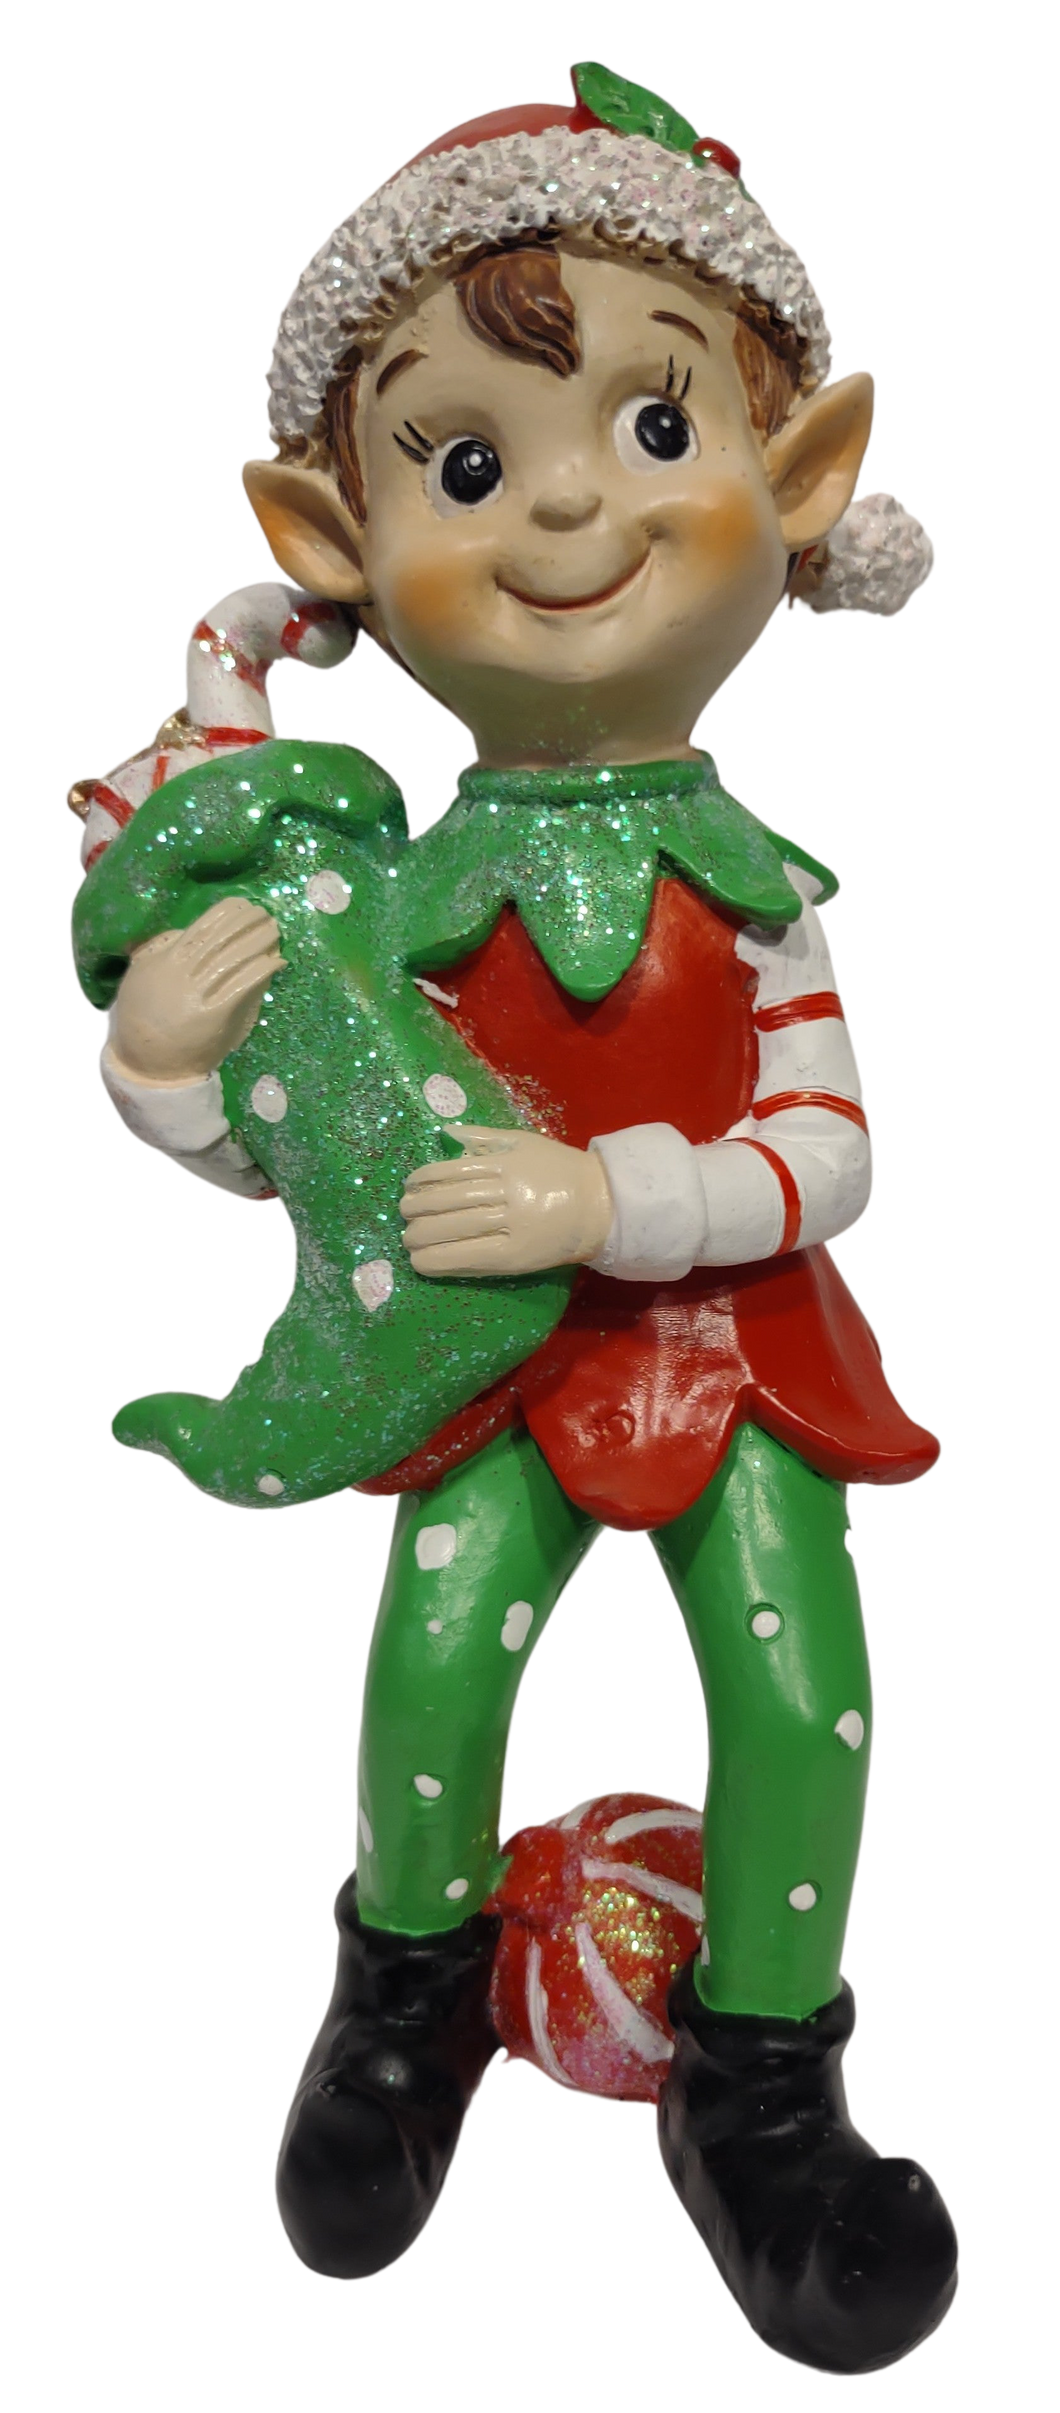 Merry Elf Figurine Holding Green Stocking Filled with Candy 9